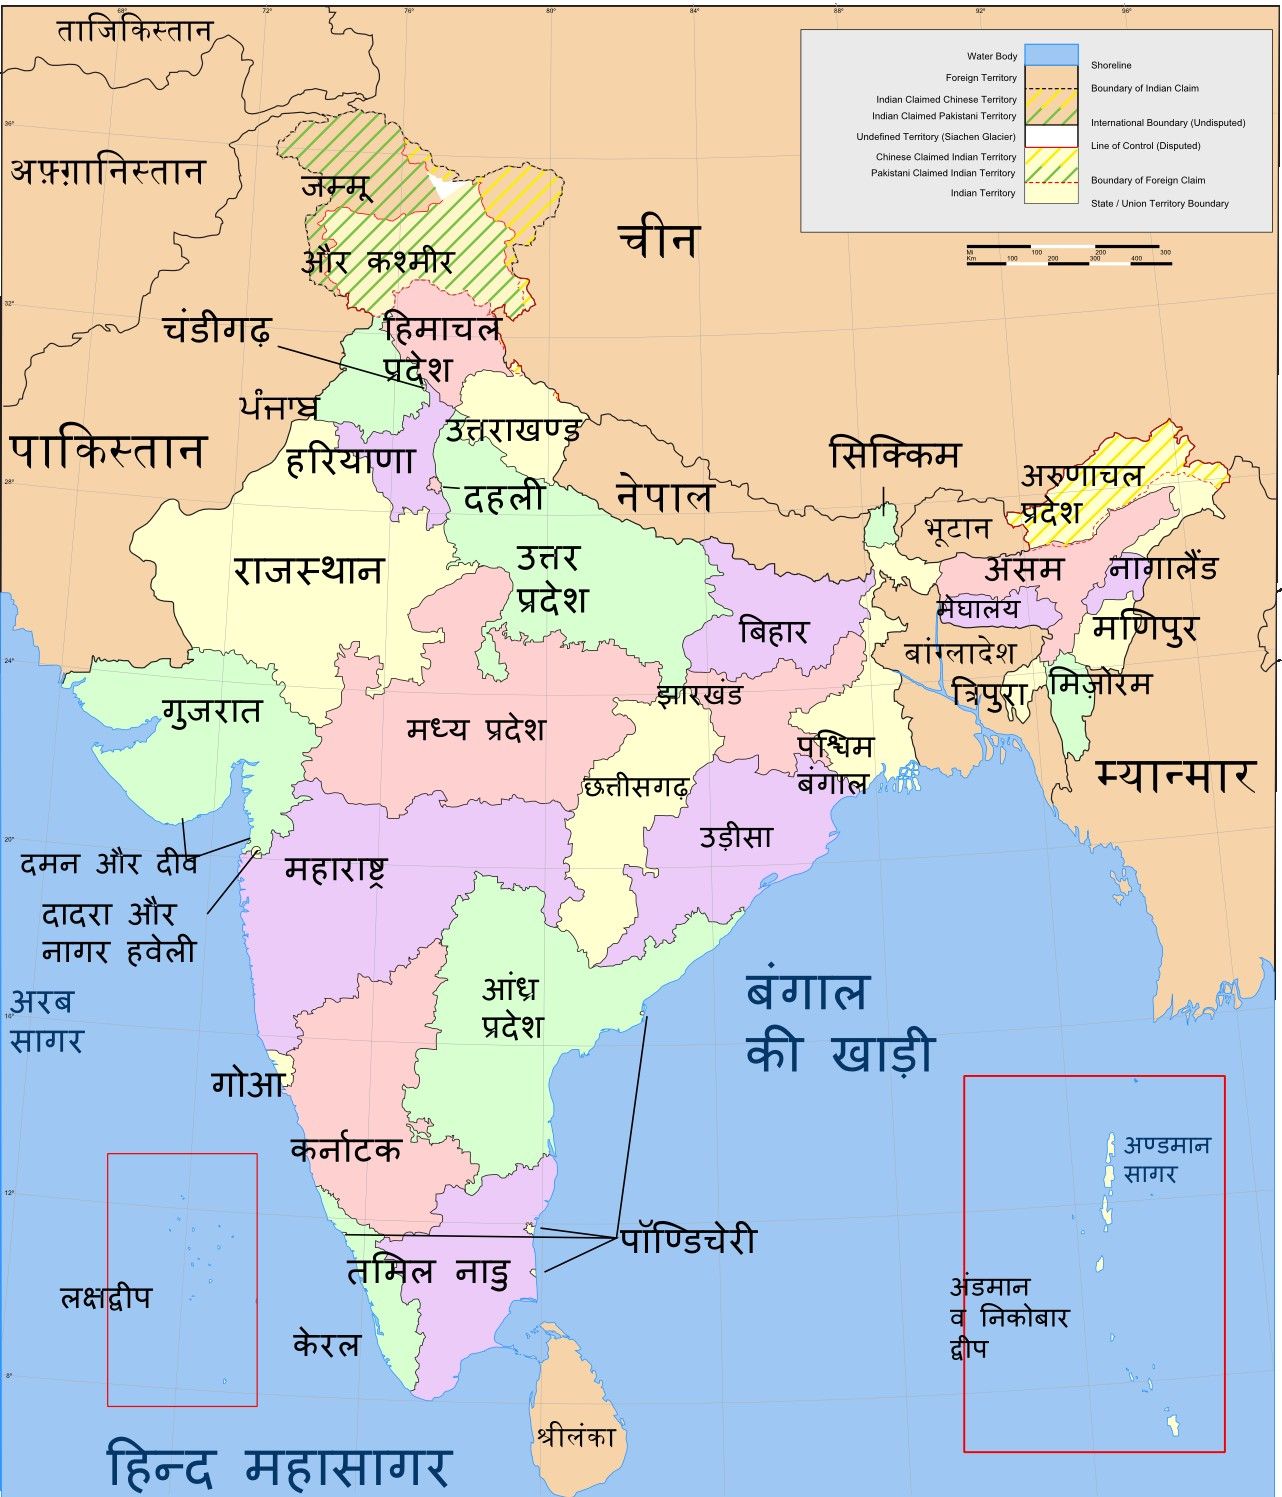 India map ideas. india map, map, political map